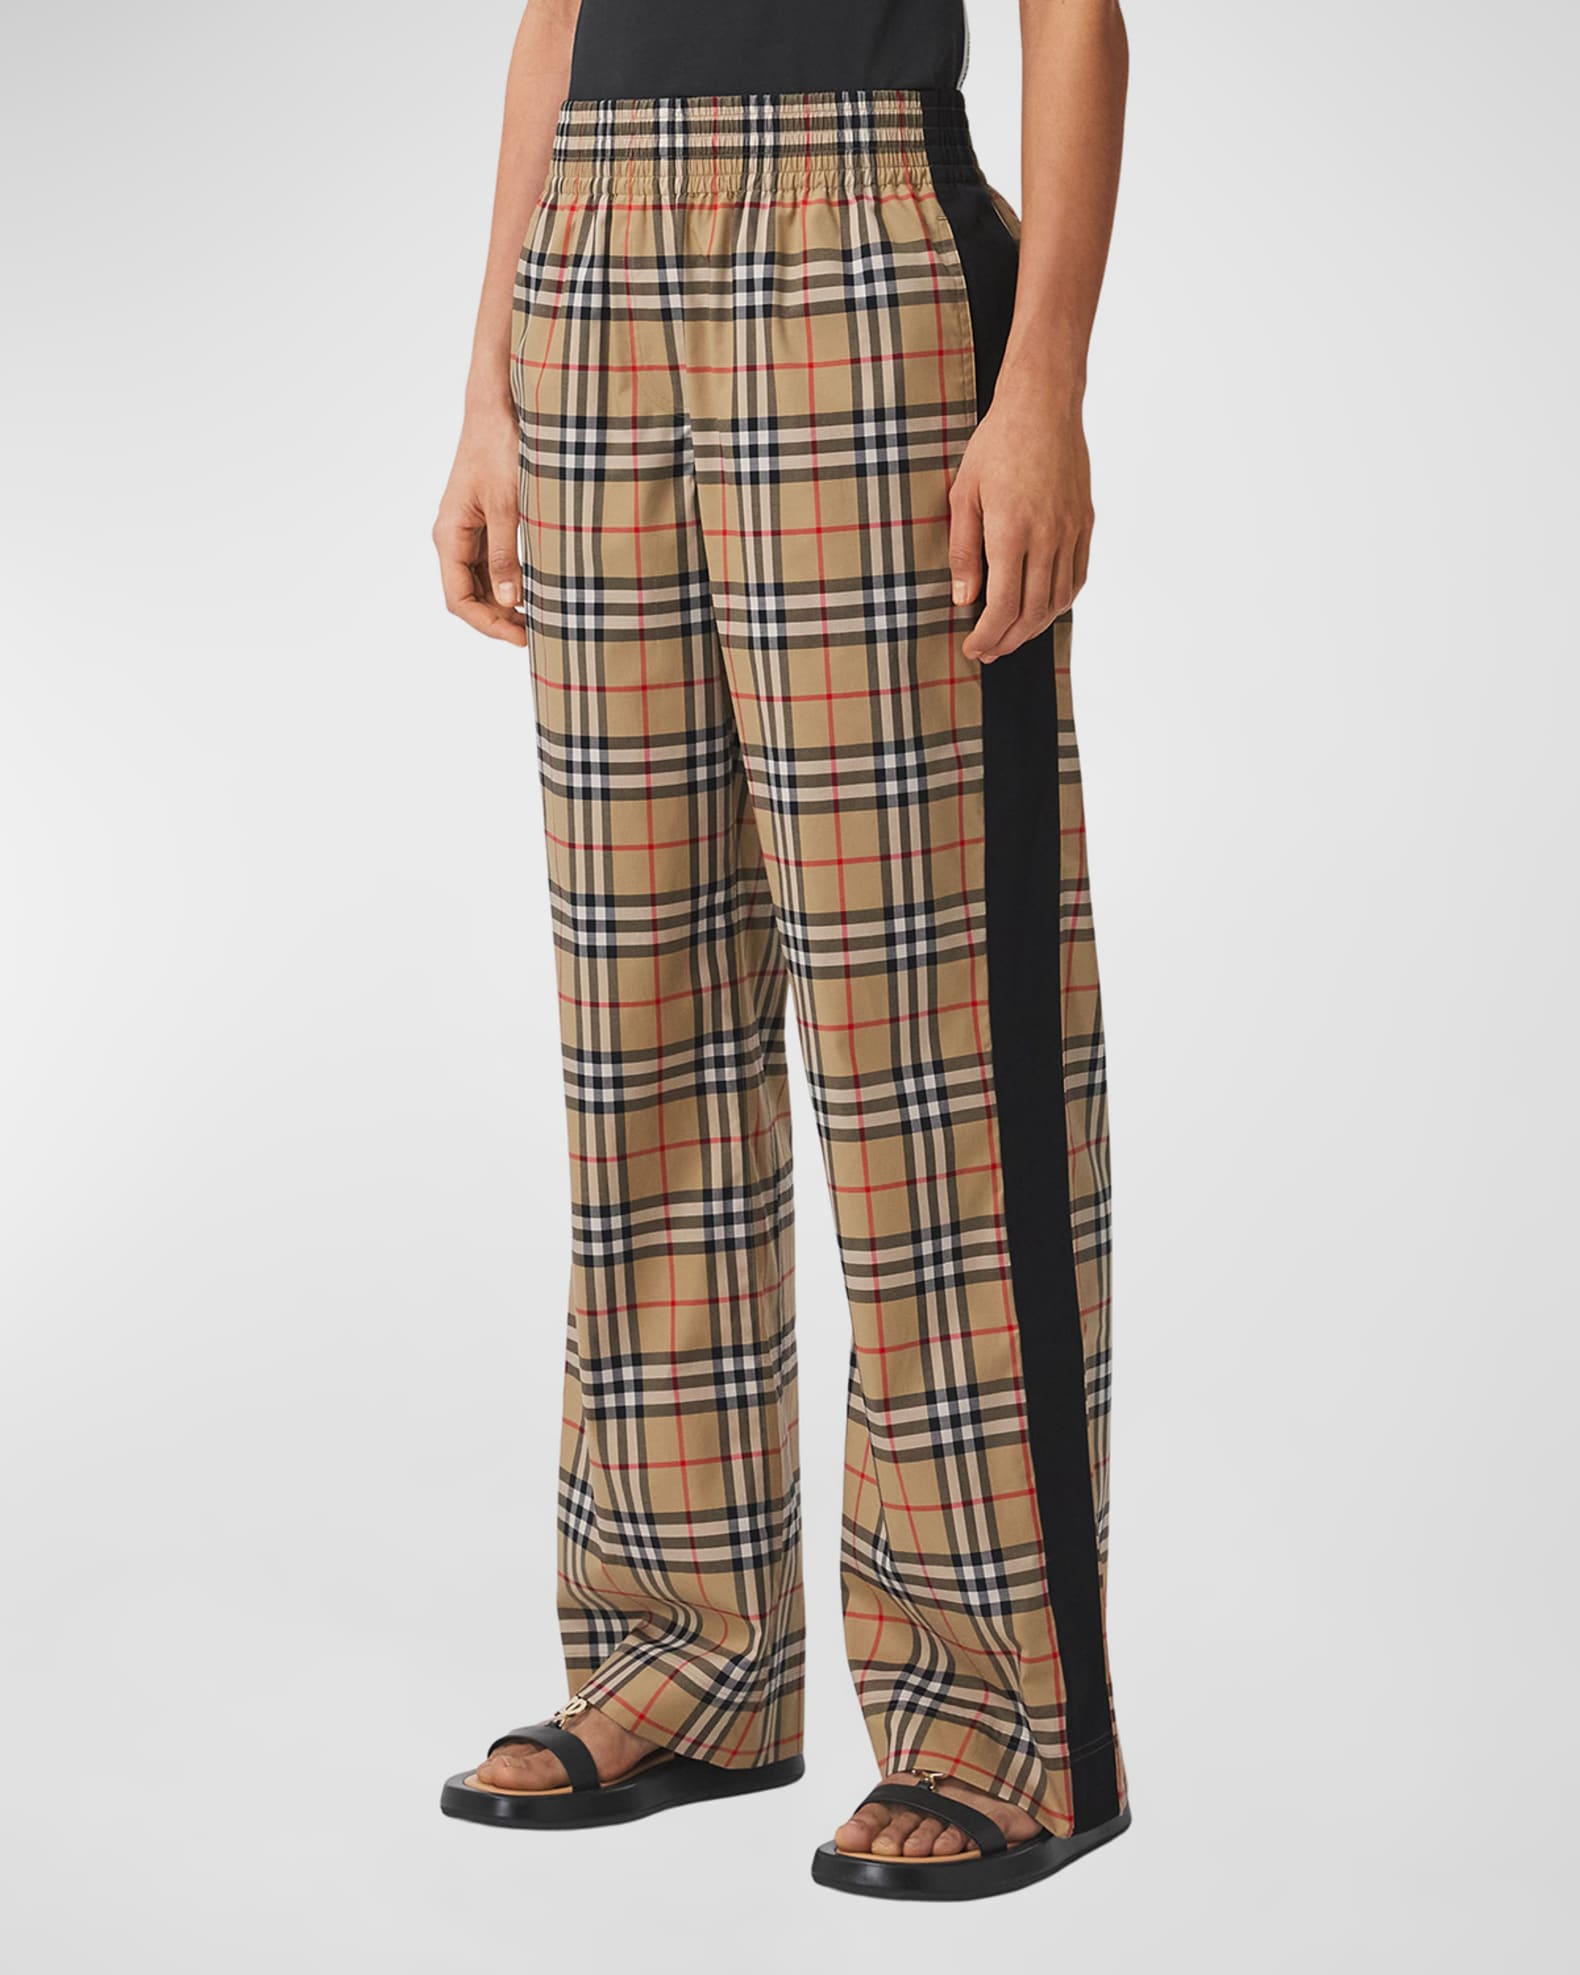 Vintage Burberry pants are they legit? : r/Burberry